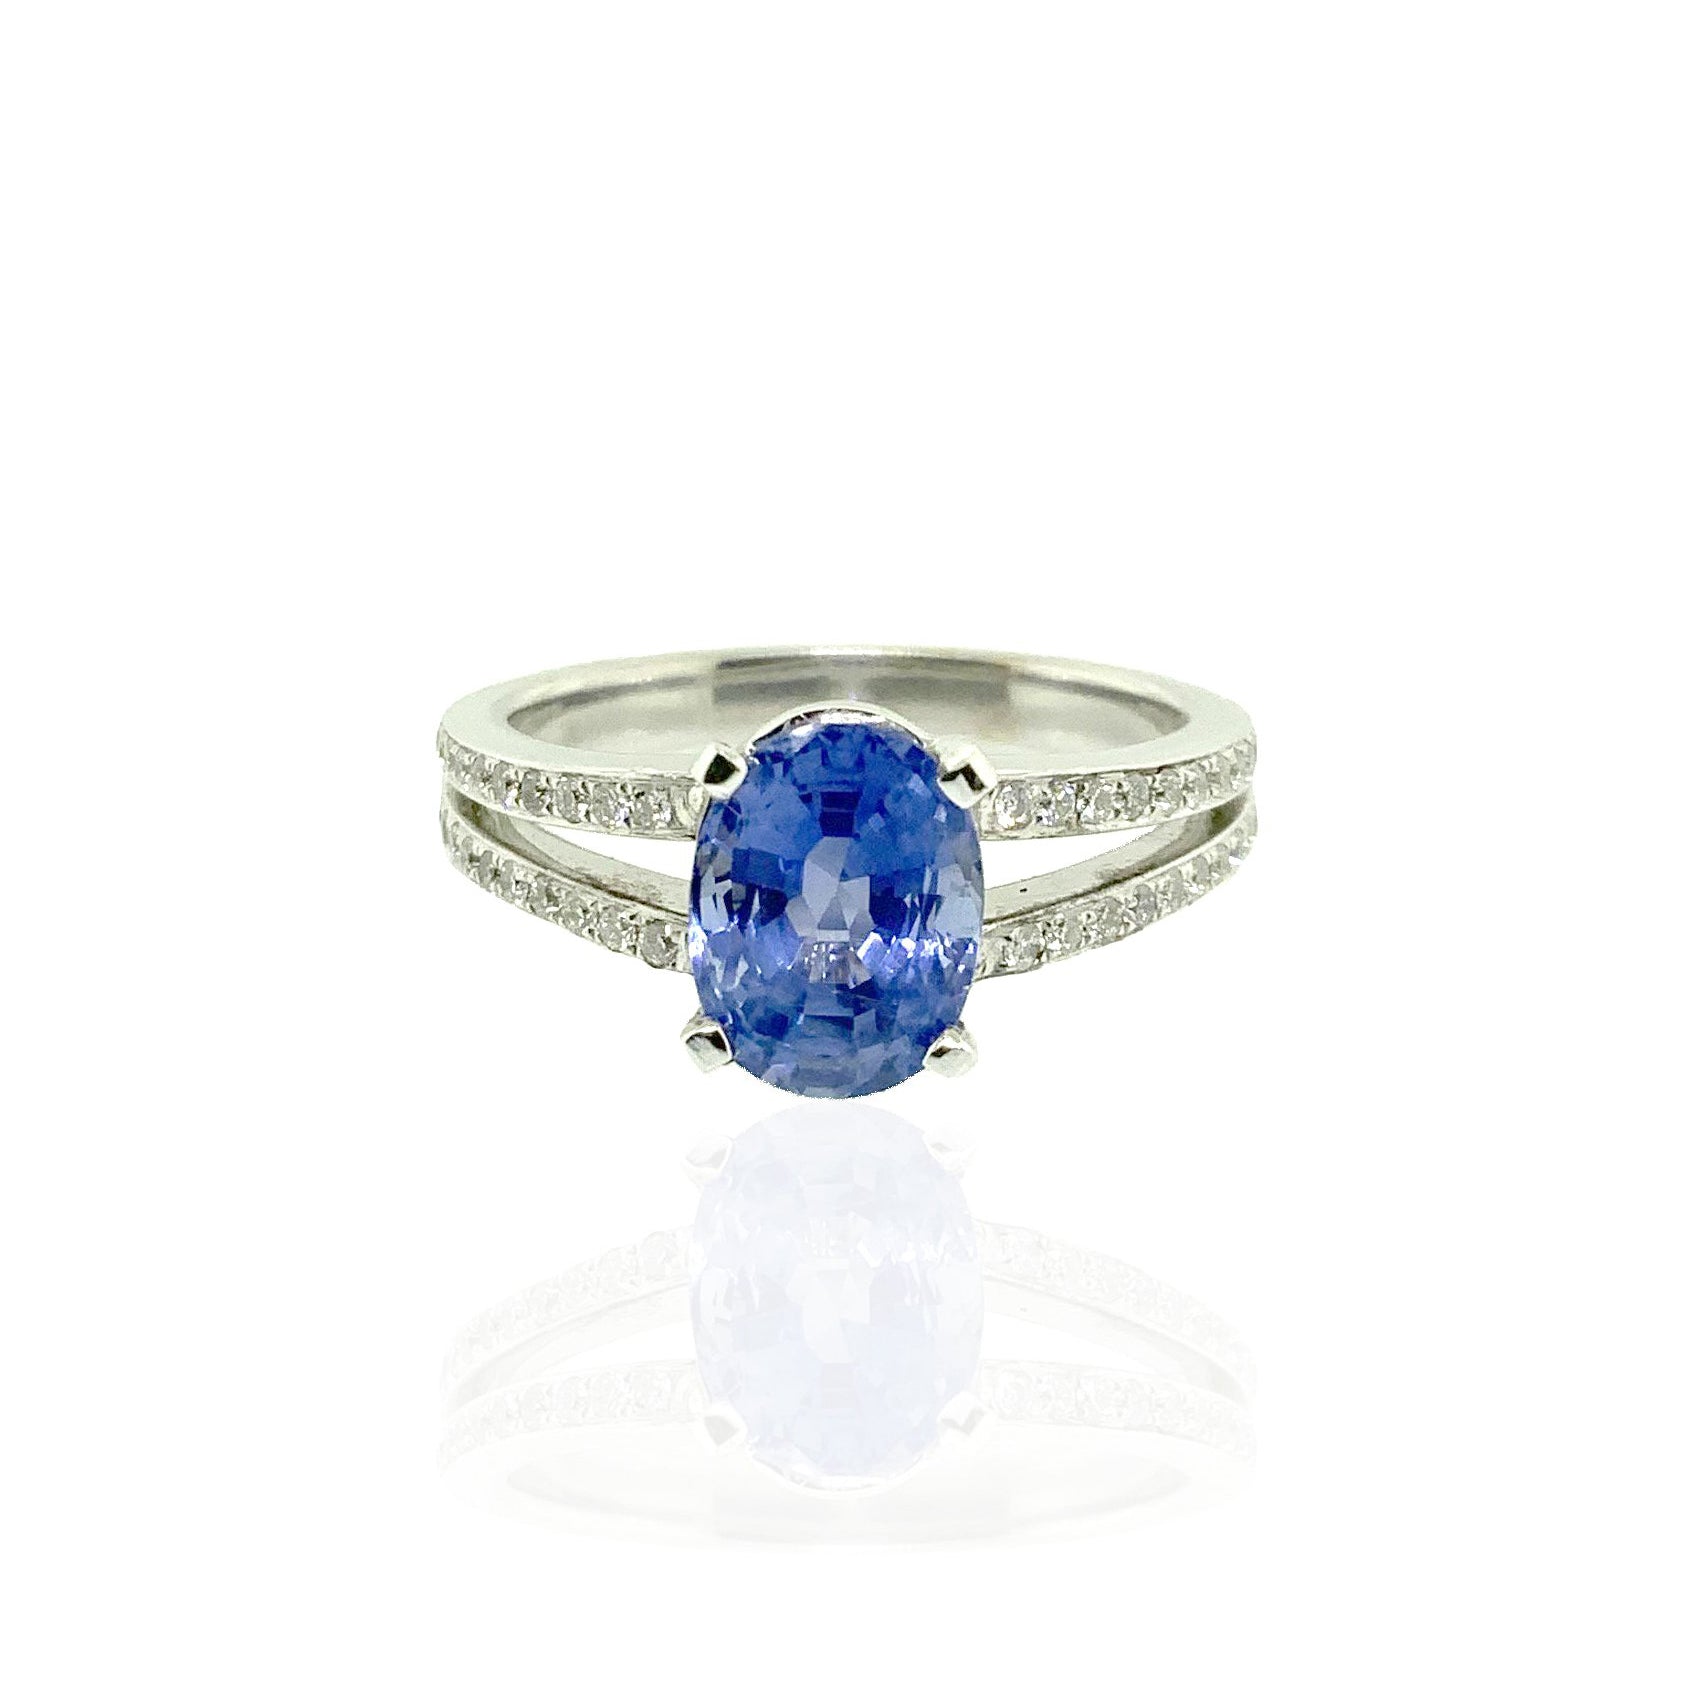 14k White Gold Blue Sapphire and Diamond Ring With Split Shank